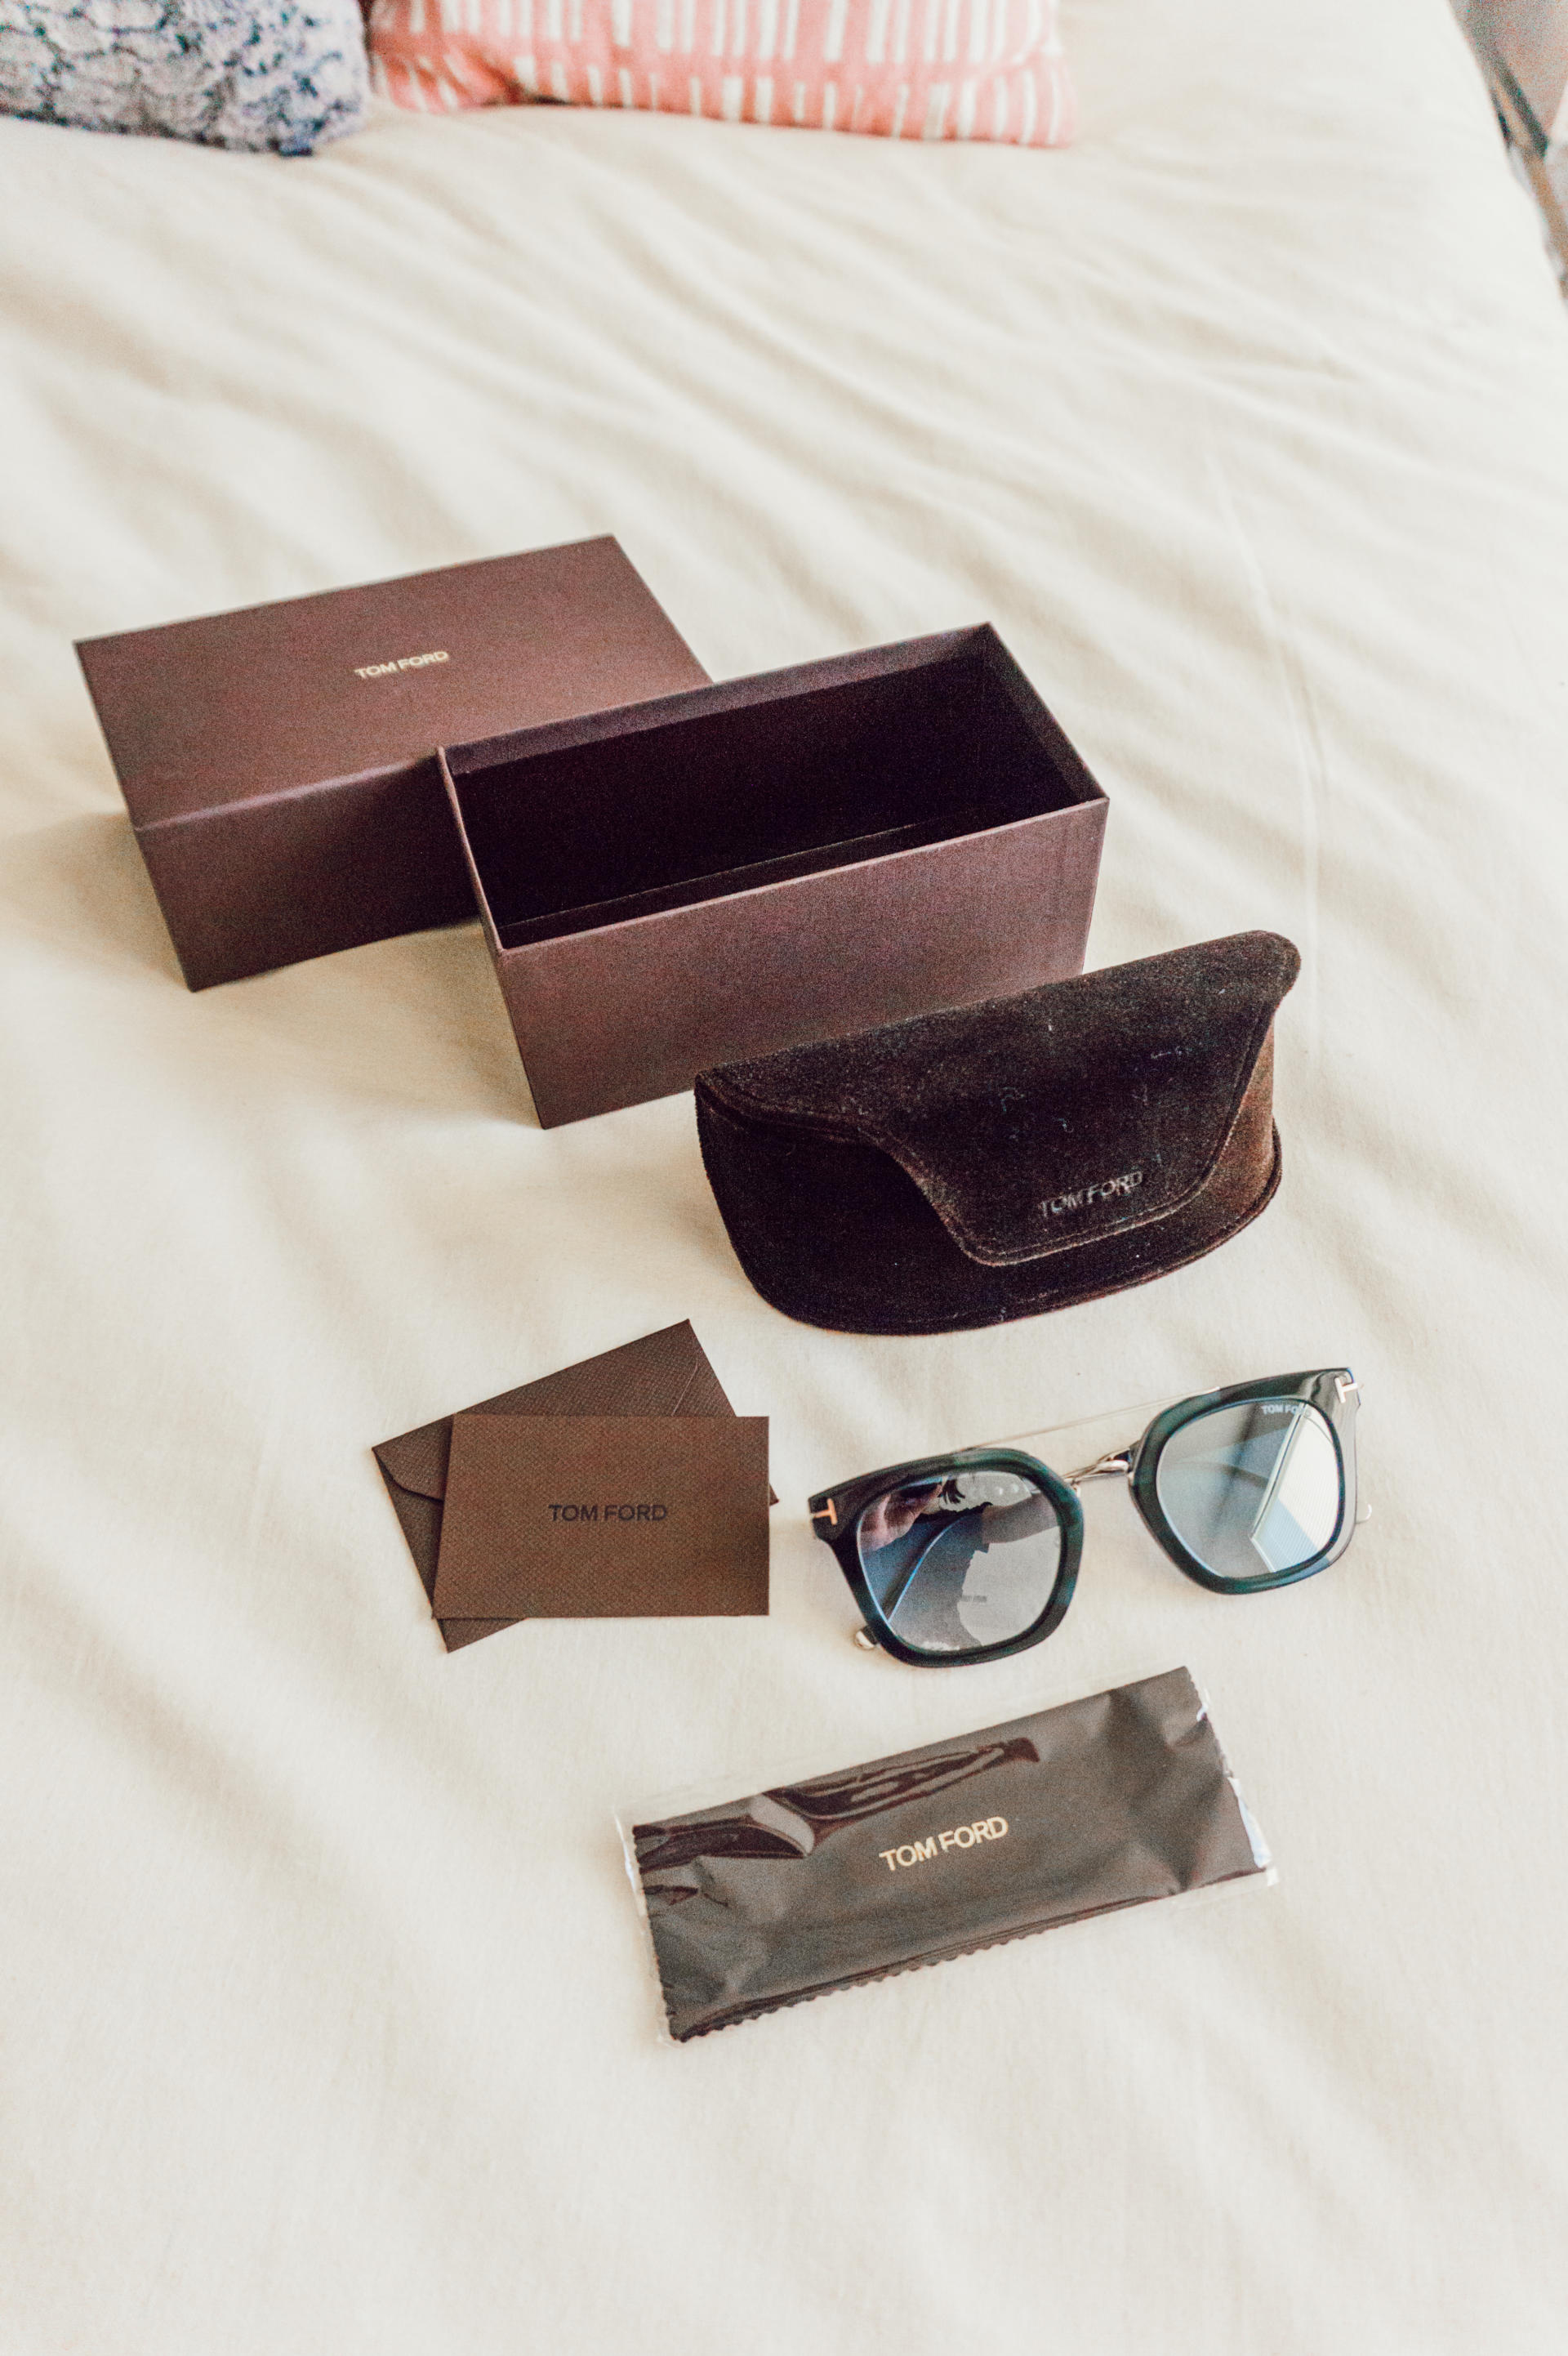 Uenighed liv Sovesal Review: Discounted Tom Ford Sunglasses from Smart Buy Glasses - Abby Saylor  Armbruster